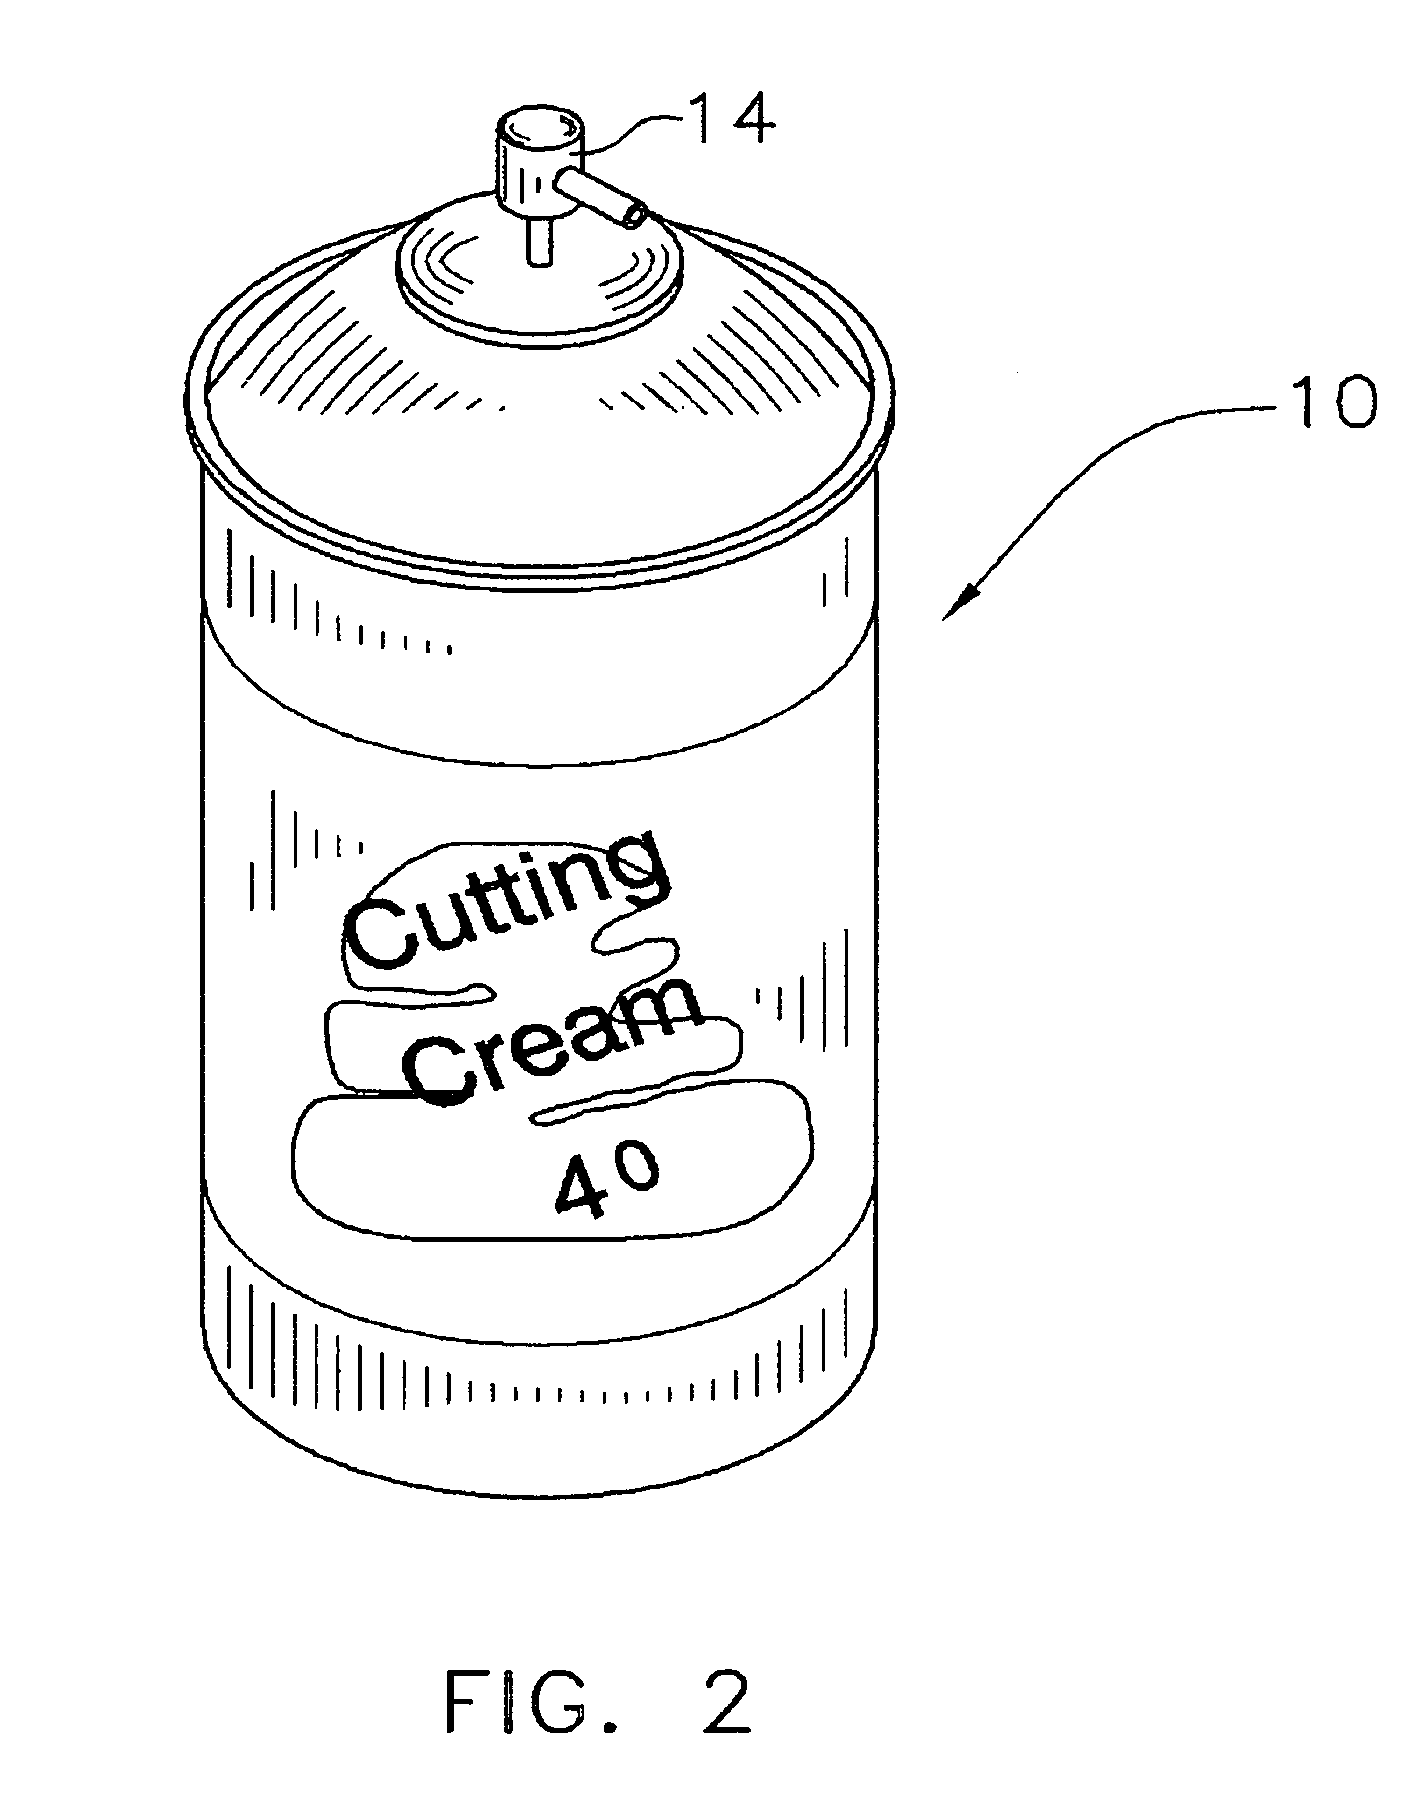 Shaving cream composition and method of using